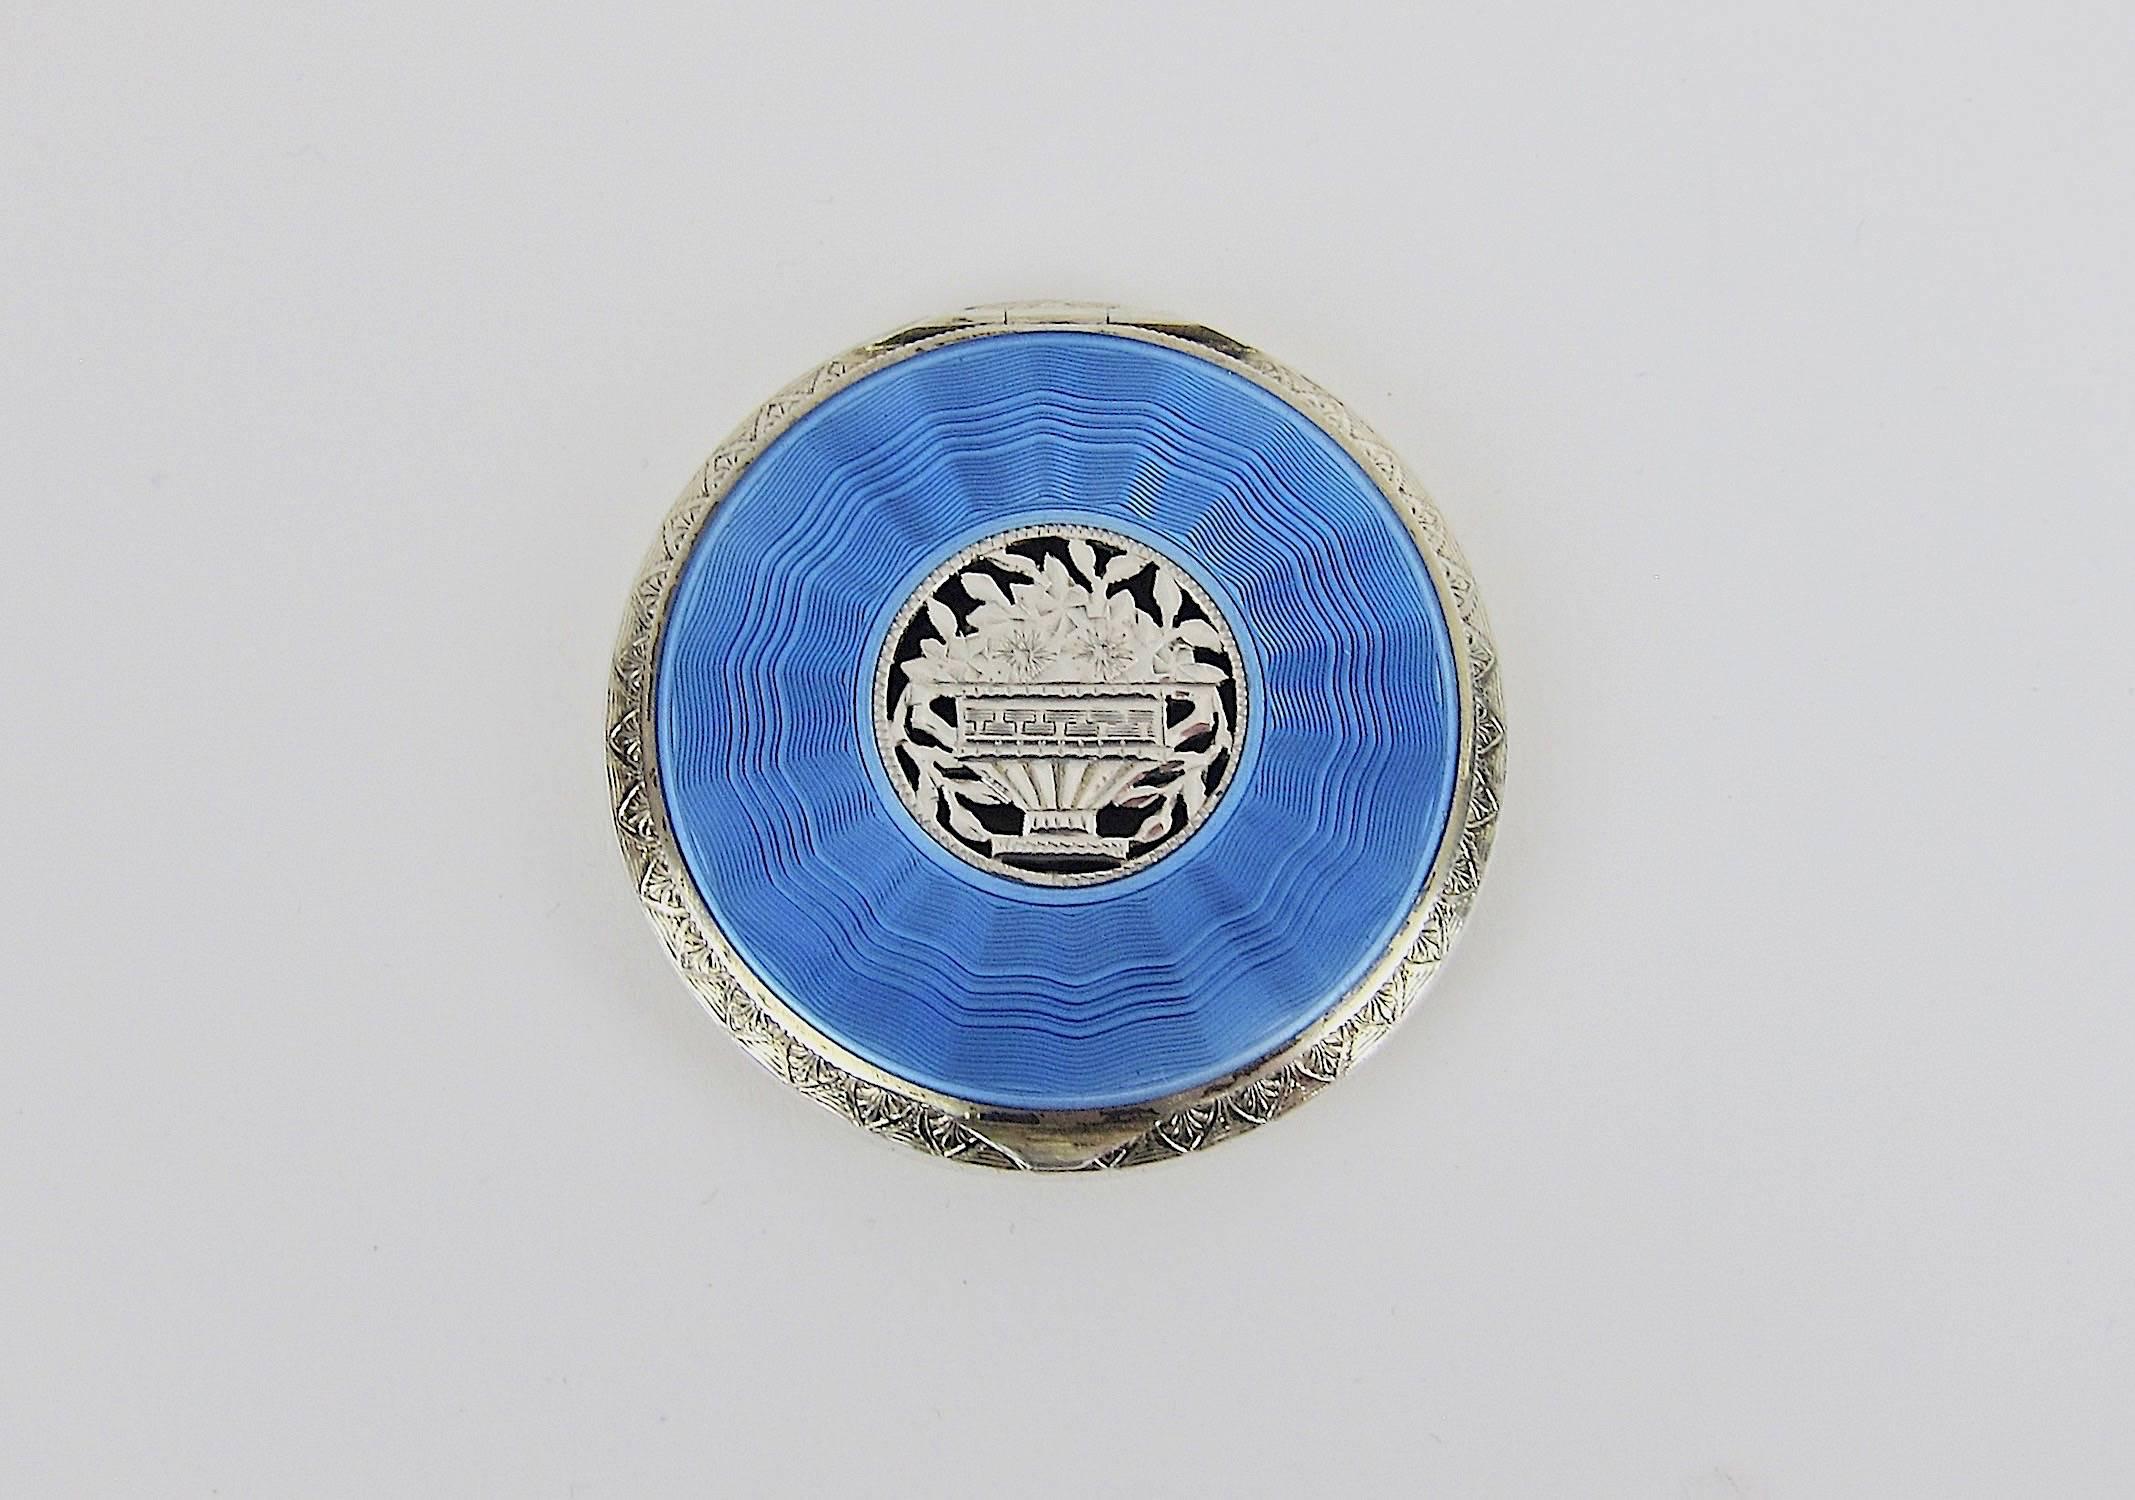 An antique sterling silver hinged compact from Austria with sky blue guilloche enamel decoration. This early 20th century accessory is decorated with a wide band of blue enamel encircling an engraved openwork central floral design. The compact opens